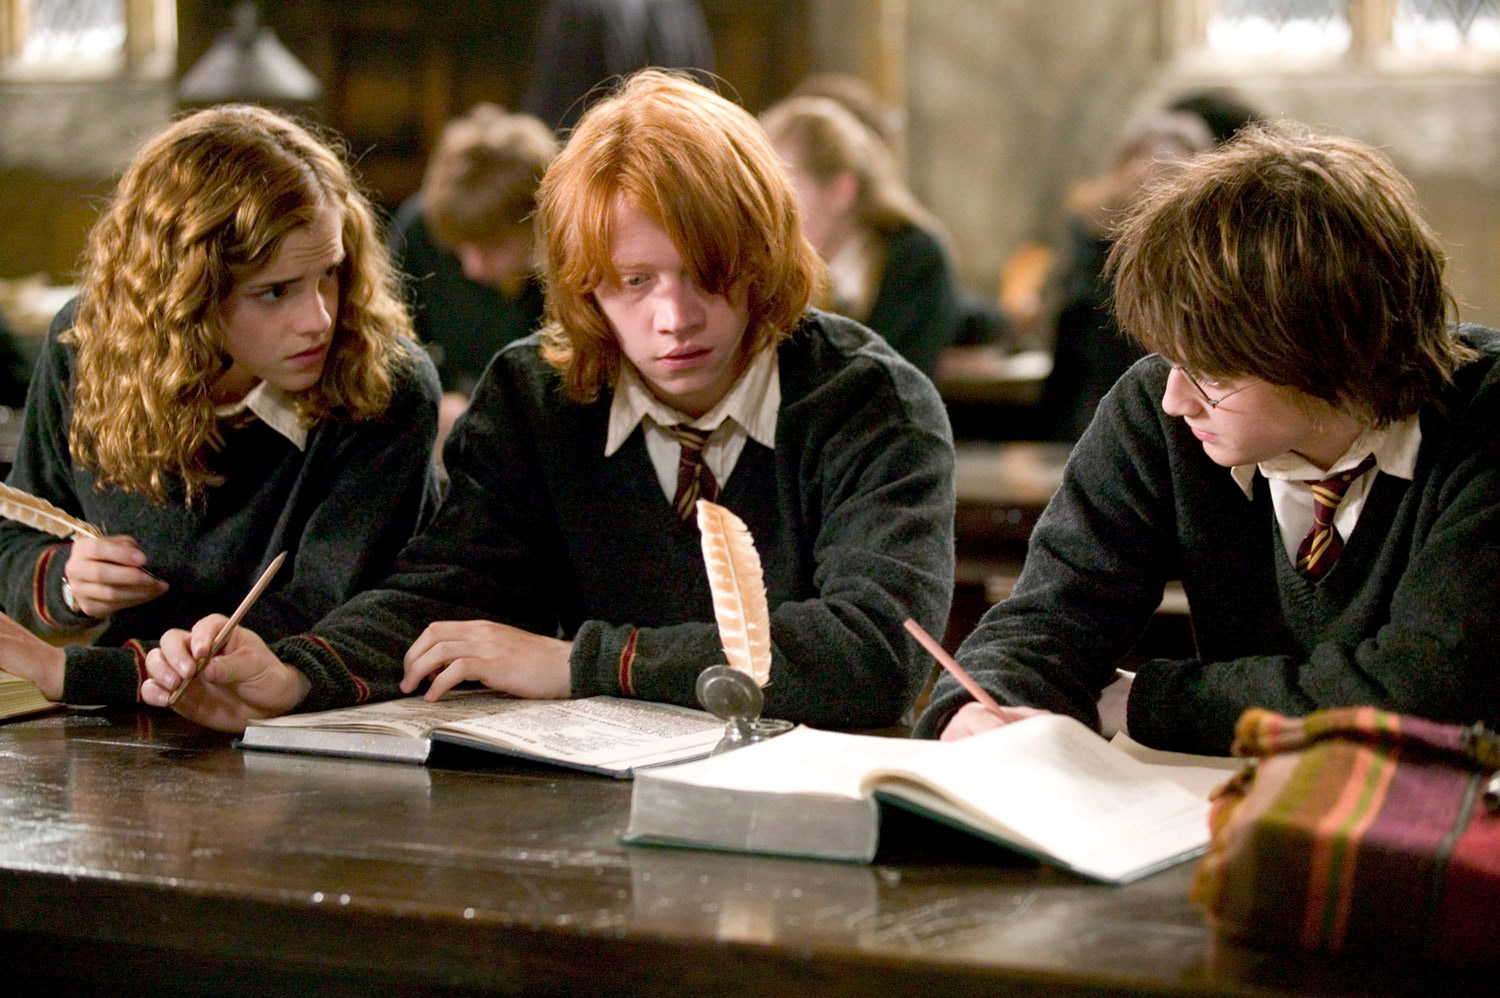 Hermione, Ron and Harry in the Great Hall